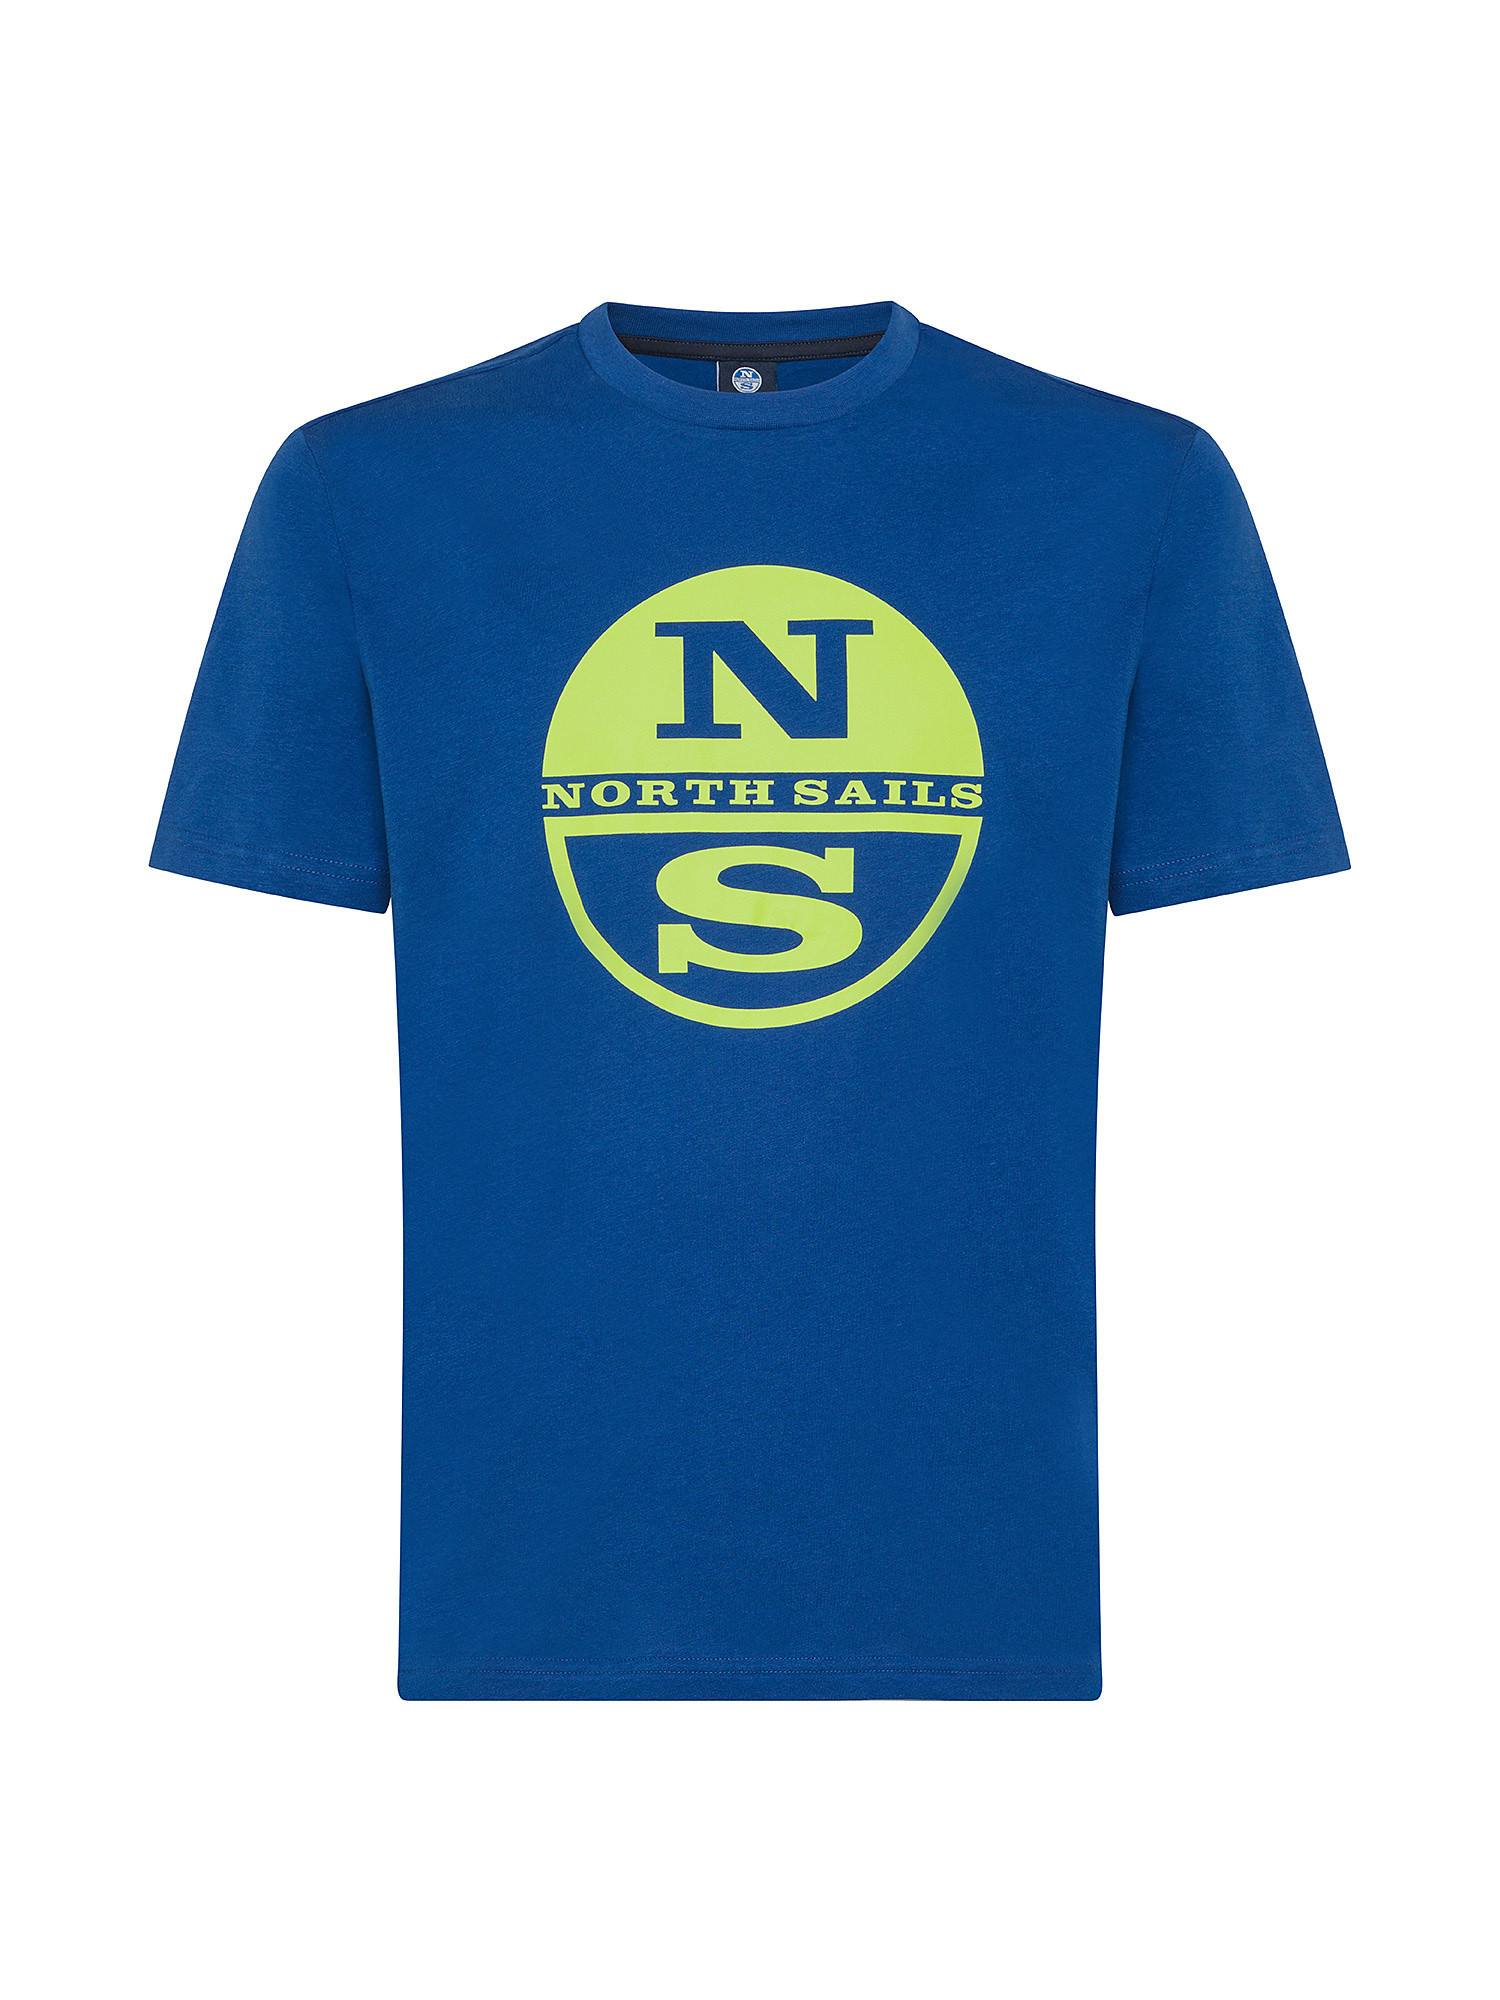 North sails - Organic cotton jersey T-shirt with printed maxi logo, Electric Blue, large image number 0